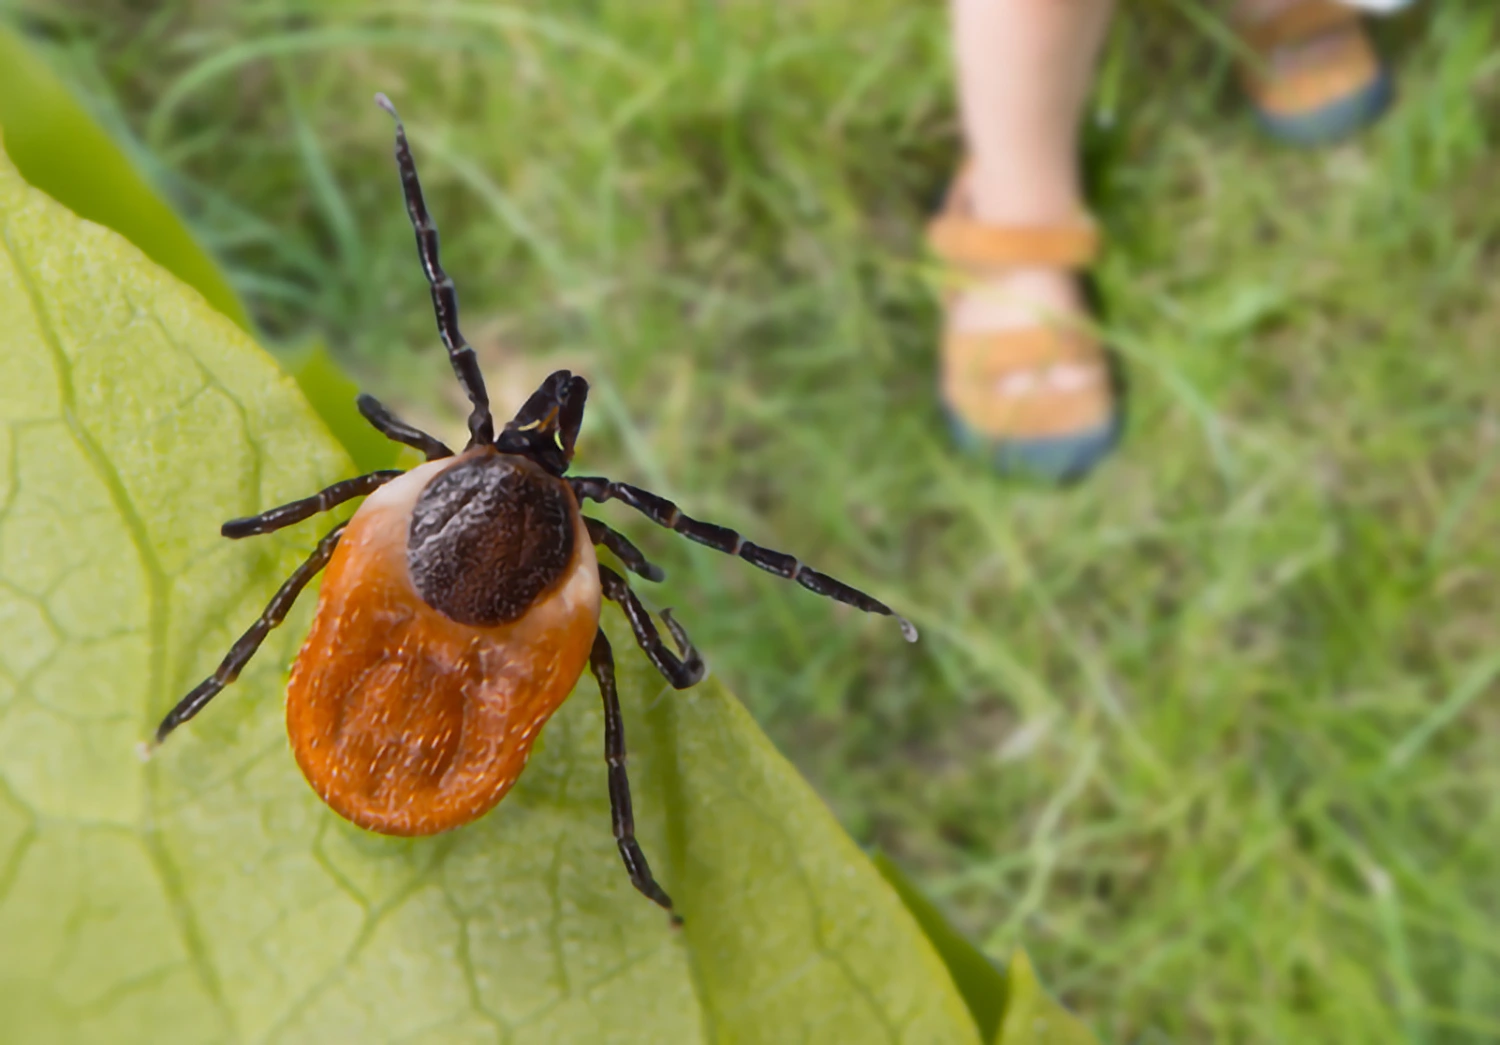 Dangerous deer tick and small child legs in summer shoes on a grass